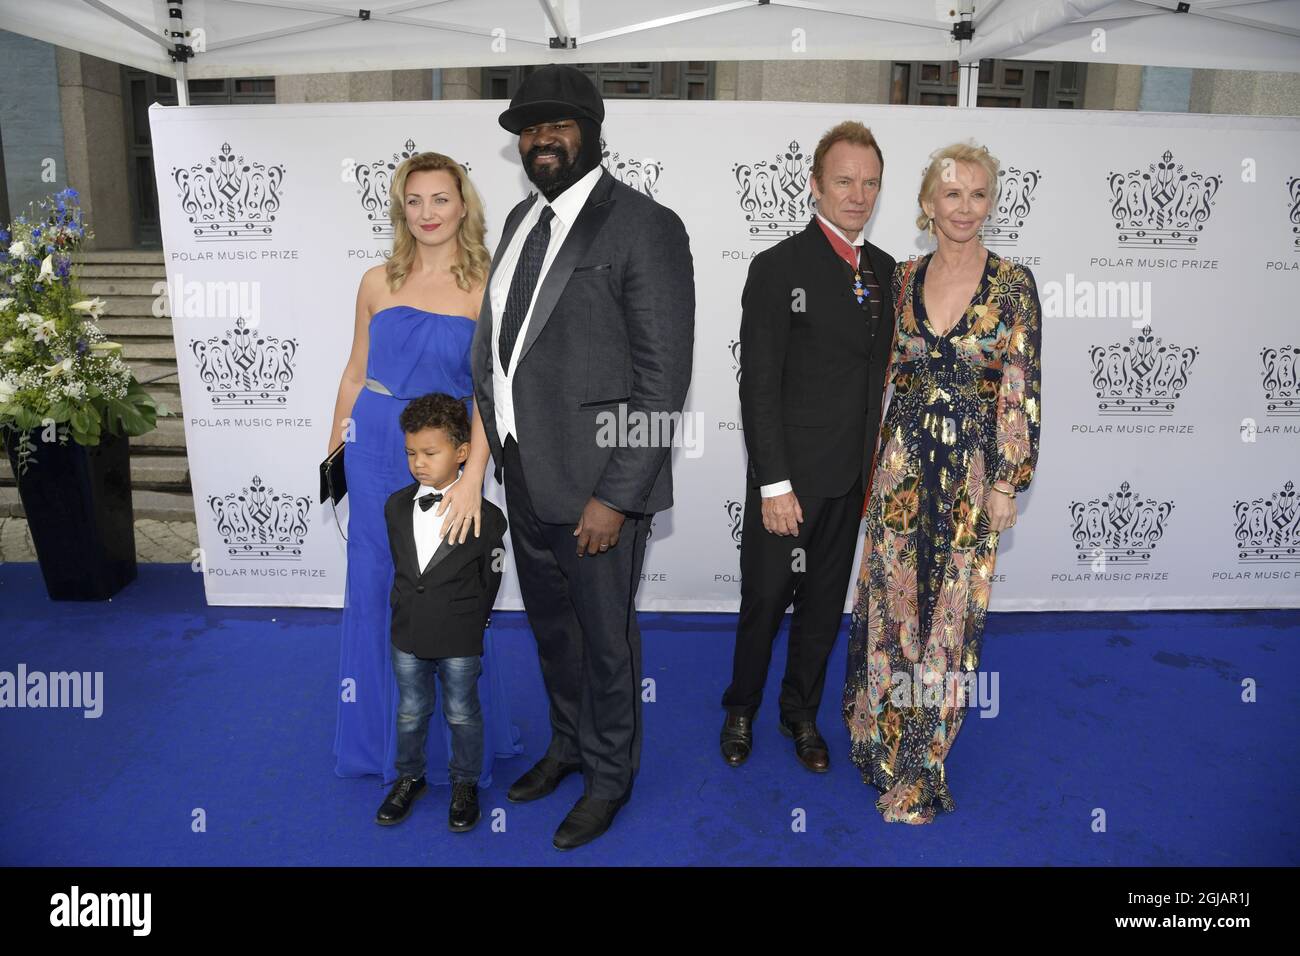 STOCKHOLM 2017-06-15 Gregory Porter with family and Polar Music Prize  Laureate Sting with wife Trudie Styler arriving at the Polar Music Prize  Awards at Konserthuset in Stockholm, Sweden, June 15, 2017. Photo: